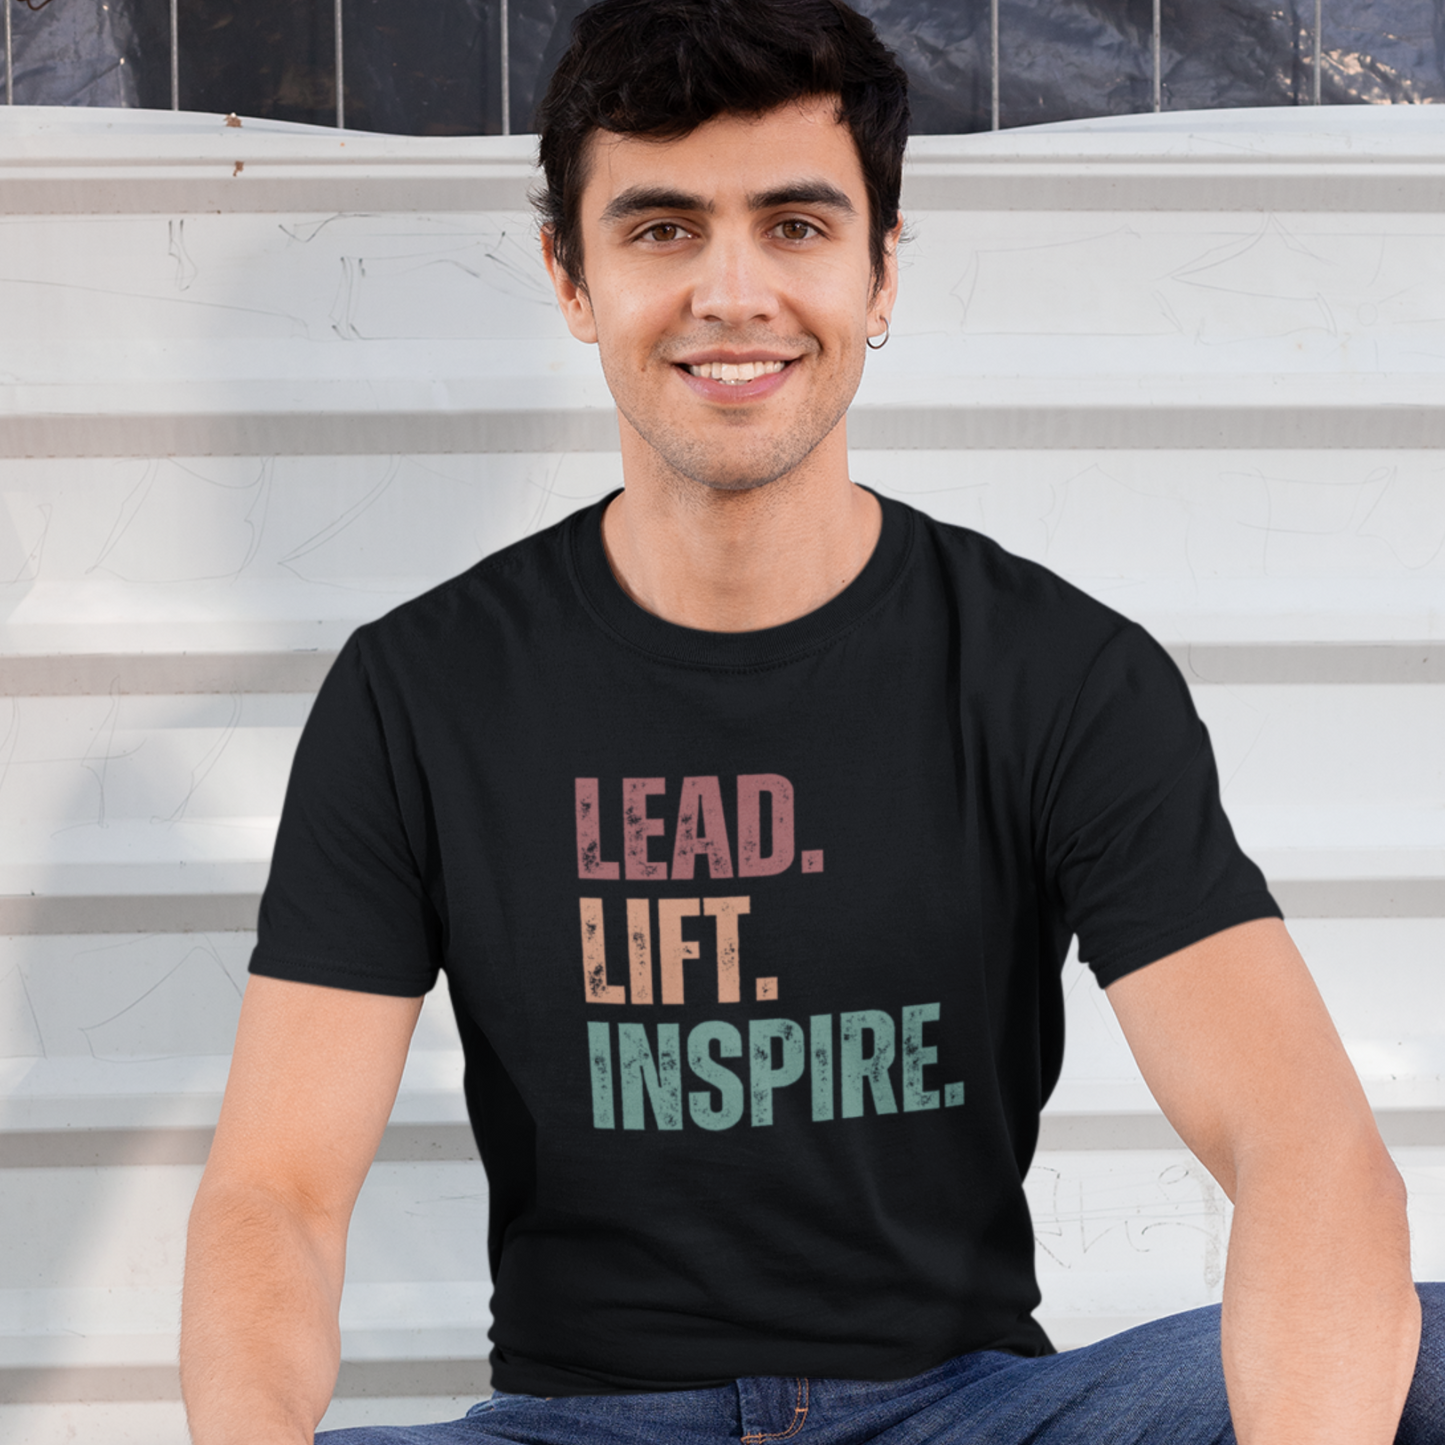 Unisex Jersey Short Sleeve Tee, Lead, Lift, Inspire T-Shirt, LDS youth, Latter Day Saints, LDS Young Women, Relief Society, LDS baptism gift